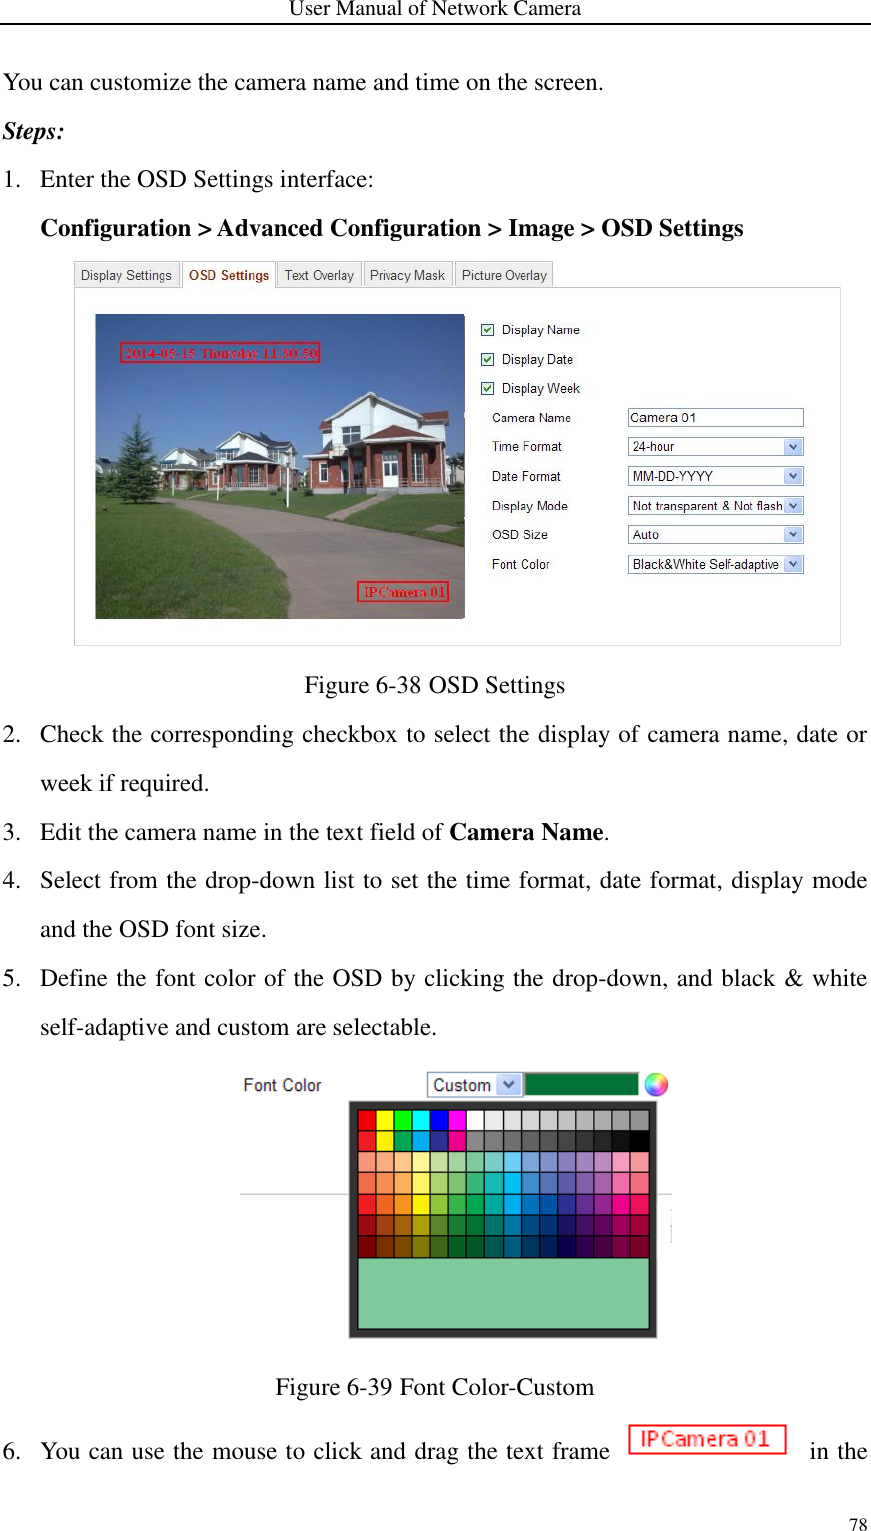 User Manual of Network Camera 78  You can customize the camera name and time on the screen. Steps: 1. Enter the OSD Settings interface: Configuration &gt; Advanced Configuration &gt; Image &gt; OSD Settings  Figure 6-38 OSD Settings 2. Check the corresponding checkbox to select the display of camera name, date or week if required.   3. Edit the camera name in the text field of Camera Name. 4. Select from the drop-down list to set the time format, date format, display mode and the OSD font size. 5. Define the font color of the OSD by clicking the drop-down, and black &amp; white self-adaptive and custom are selectable.  Figure 6-39 Font Color-Custom 6. You can use the mouse to click and drag the text frame    in the 